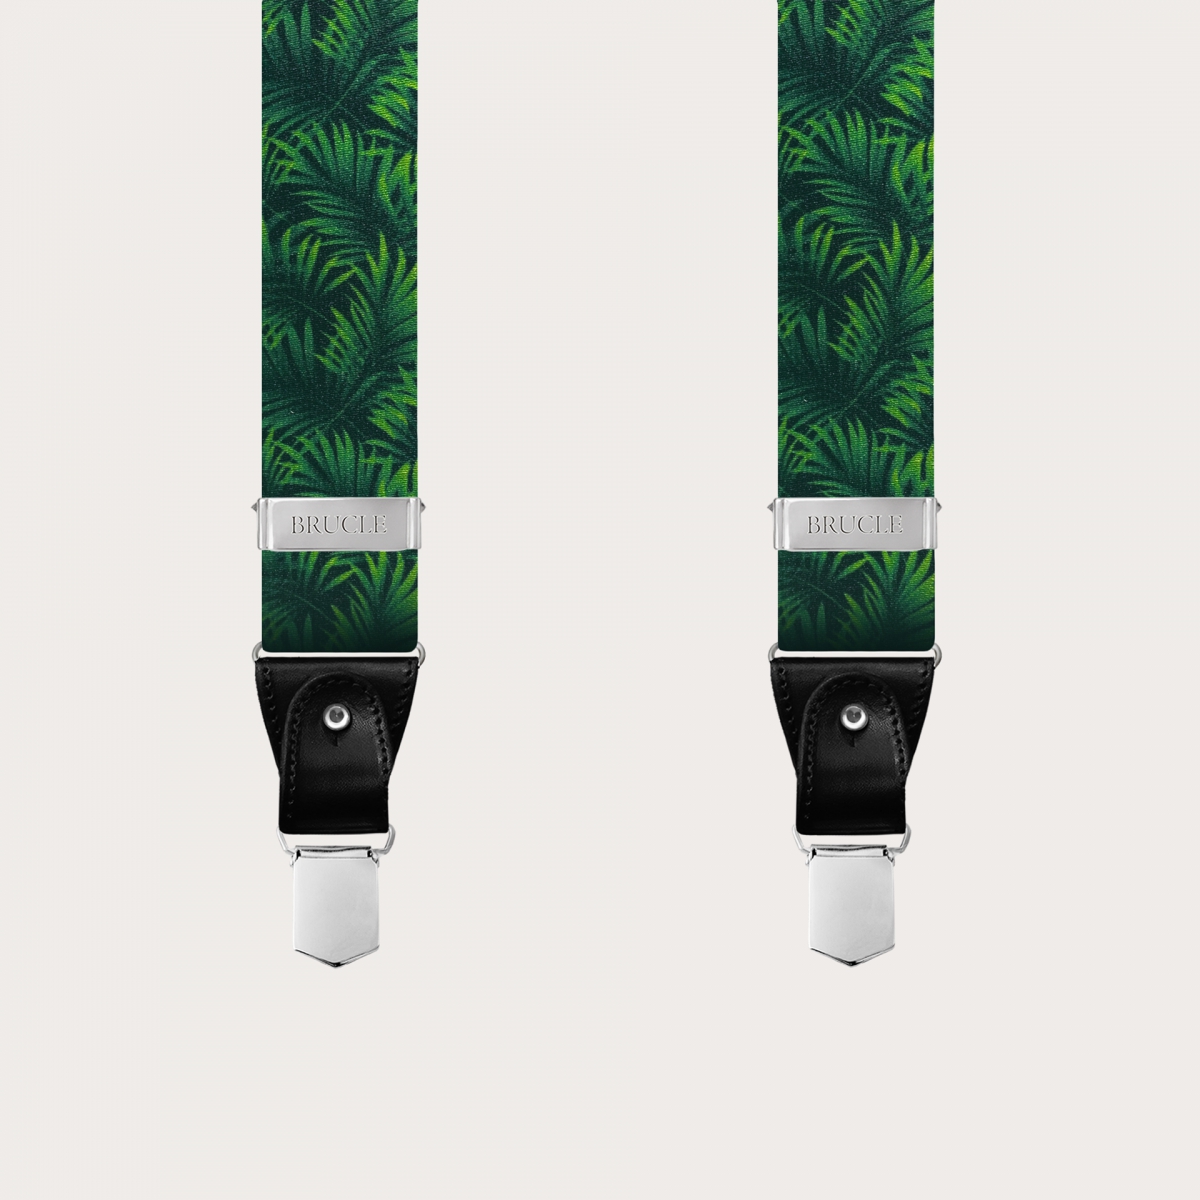 BRUCLE Satin effect double use elastic suspenders, green with palm leaves